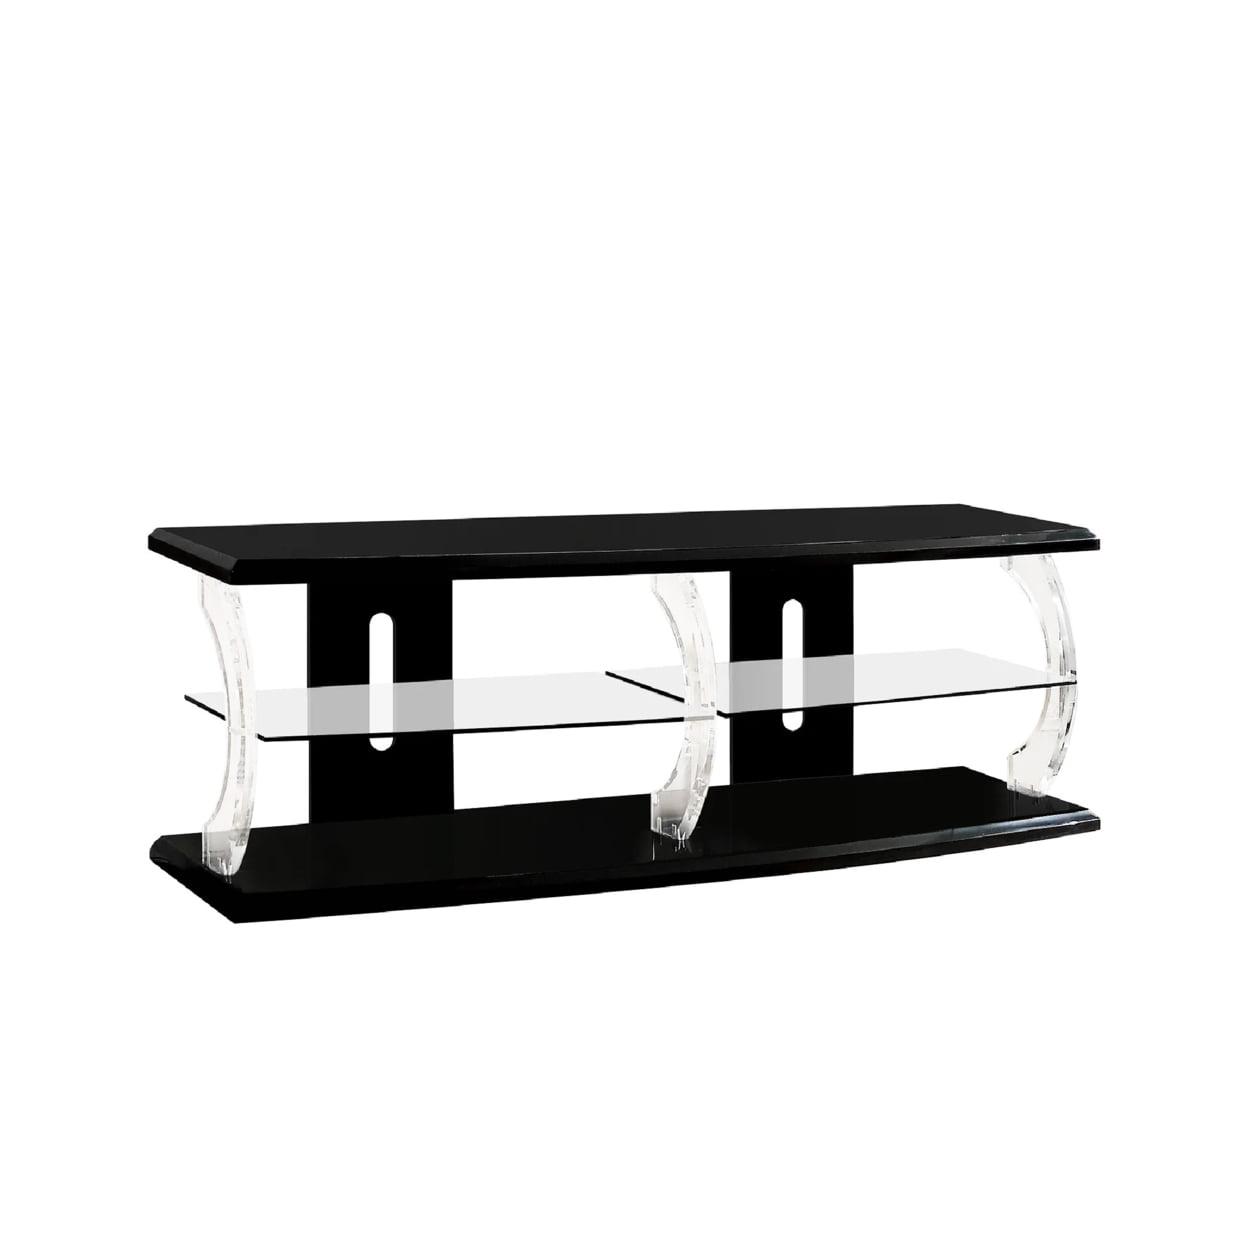 Ernst 72" Black High Gloss TV Stand with LED & Glass Shelf